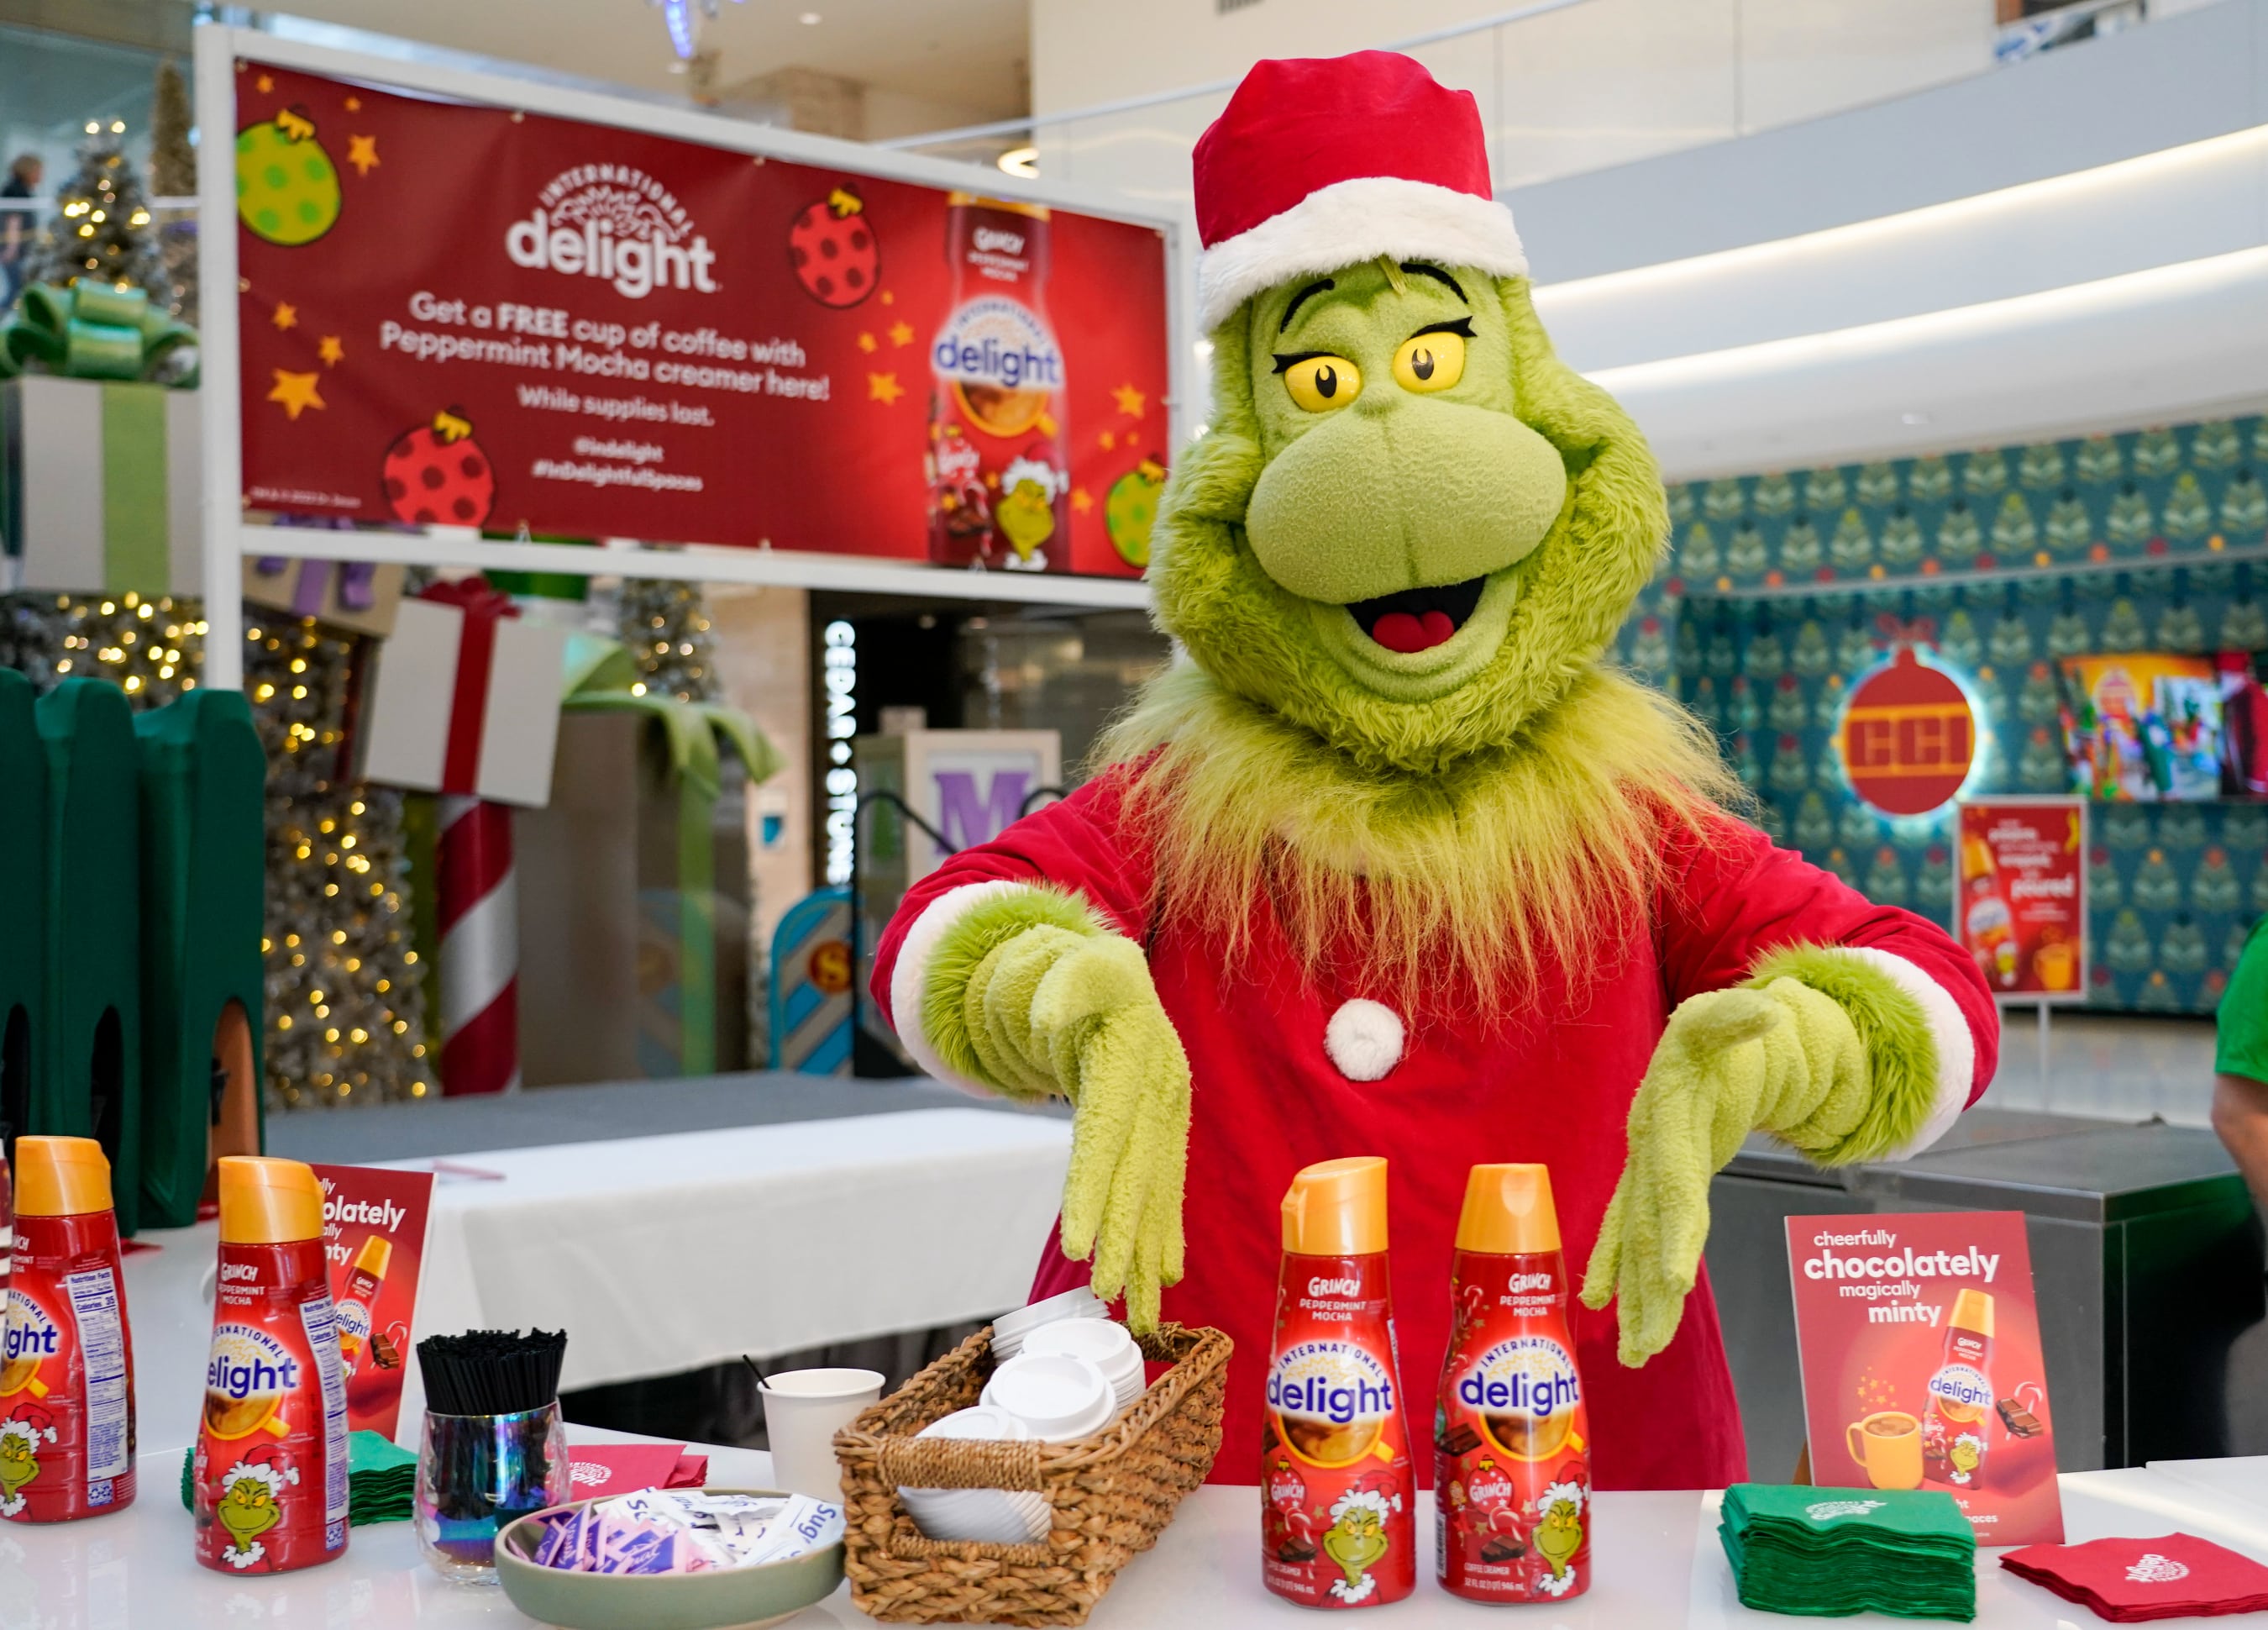 INTERNATIONAL DELIGHT® TURNED STRESS INTO JOY FOR THOUSANDS OF MALL OF AMERICA SHOPPERS WITH THE HELP OF LIMITED-EDITION GRINCH PEPPERMINT MOCHA CREAMER